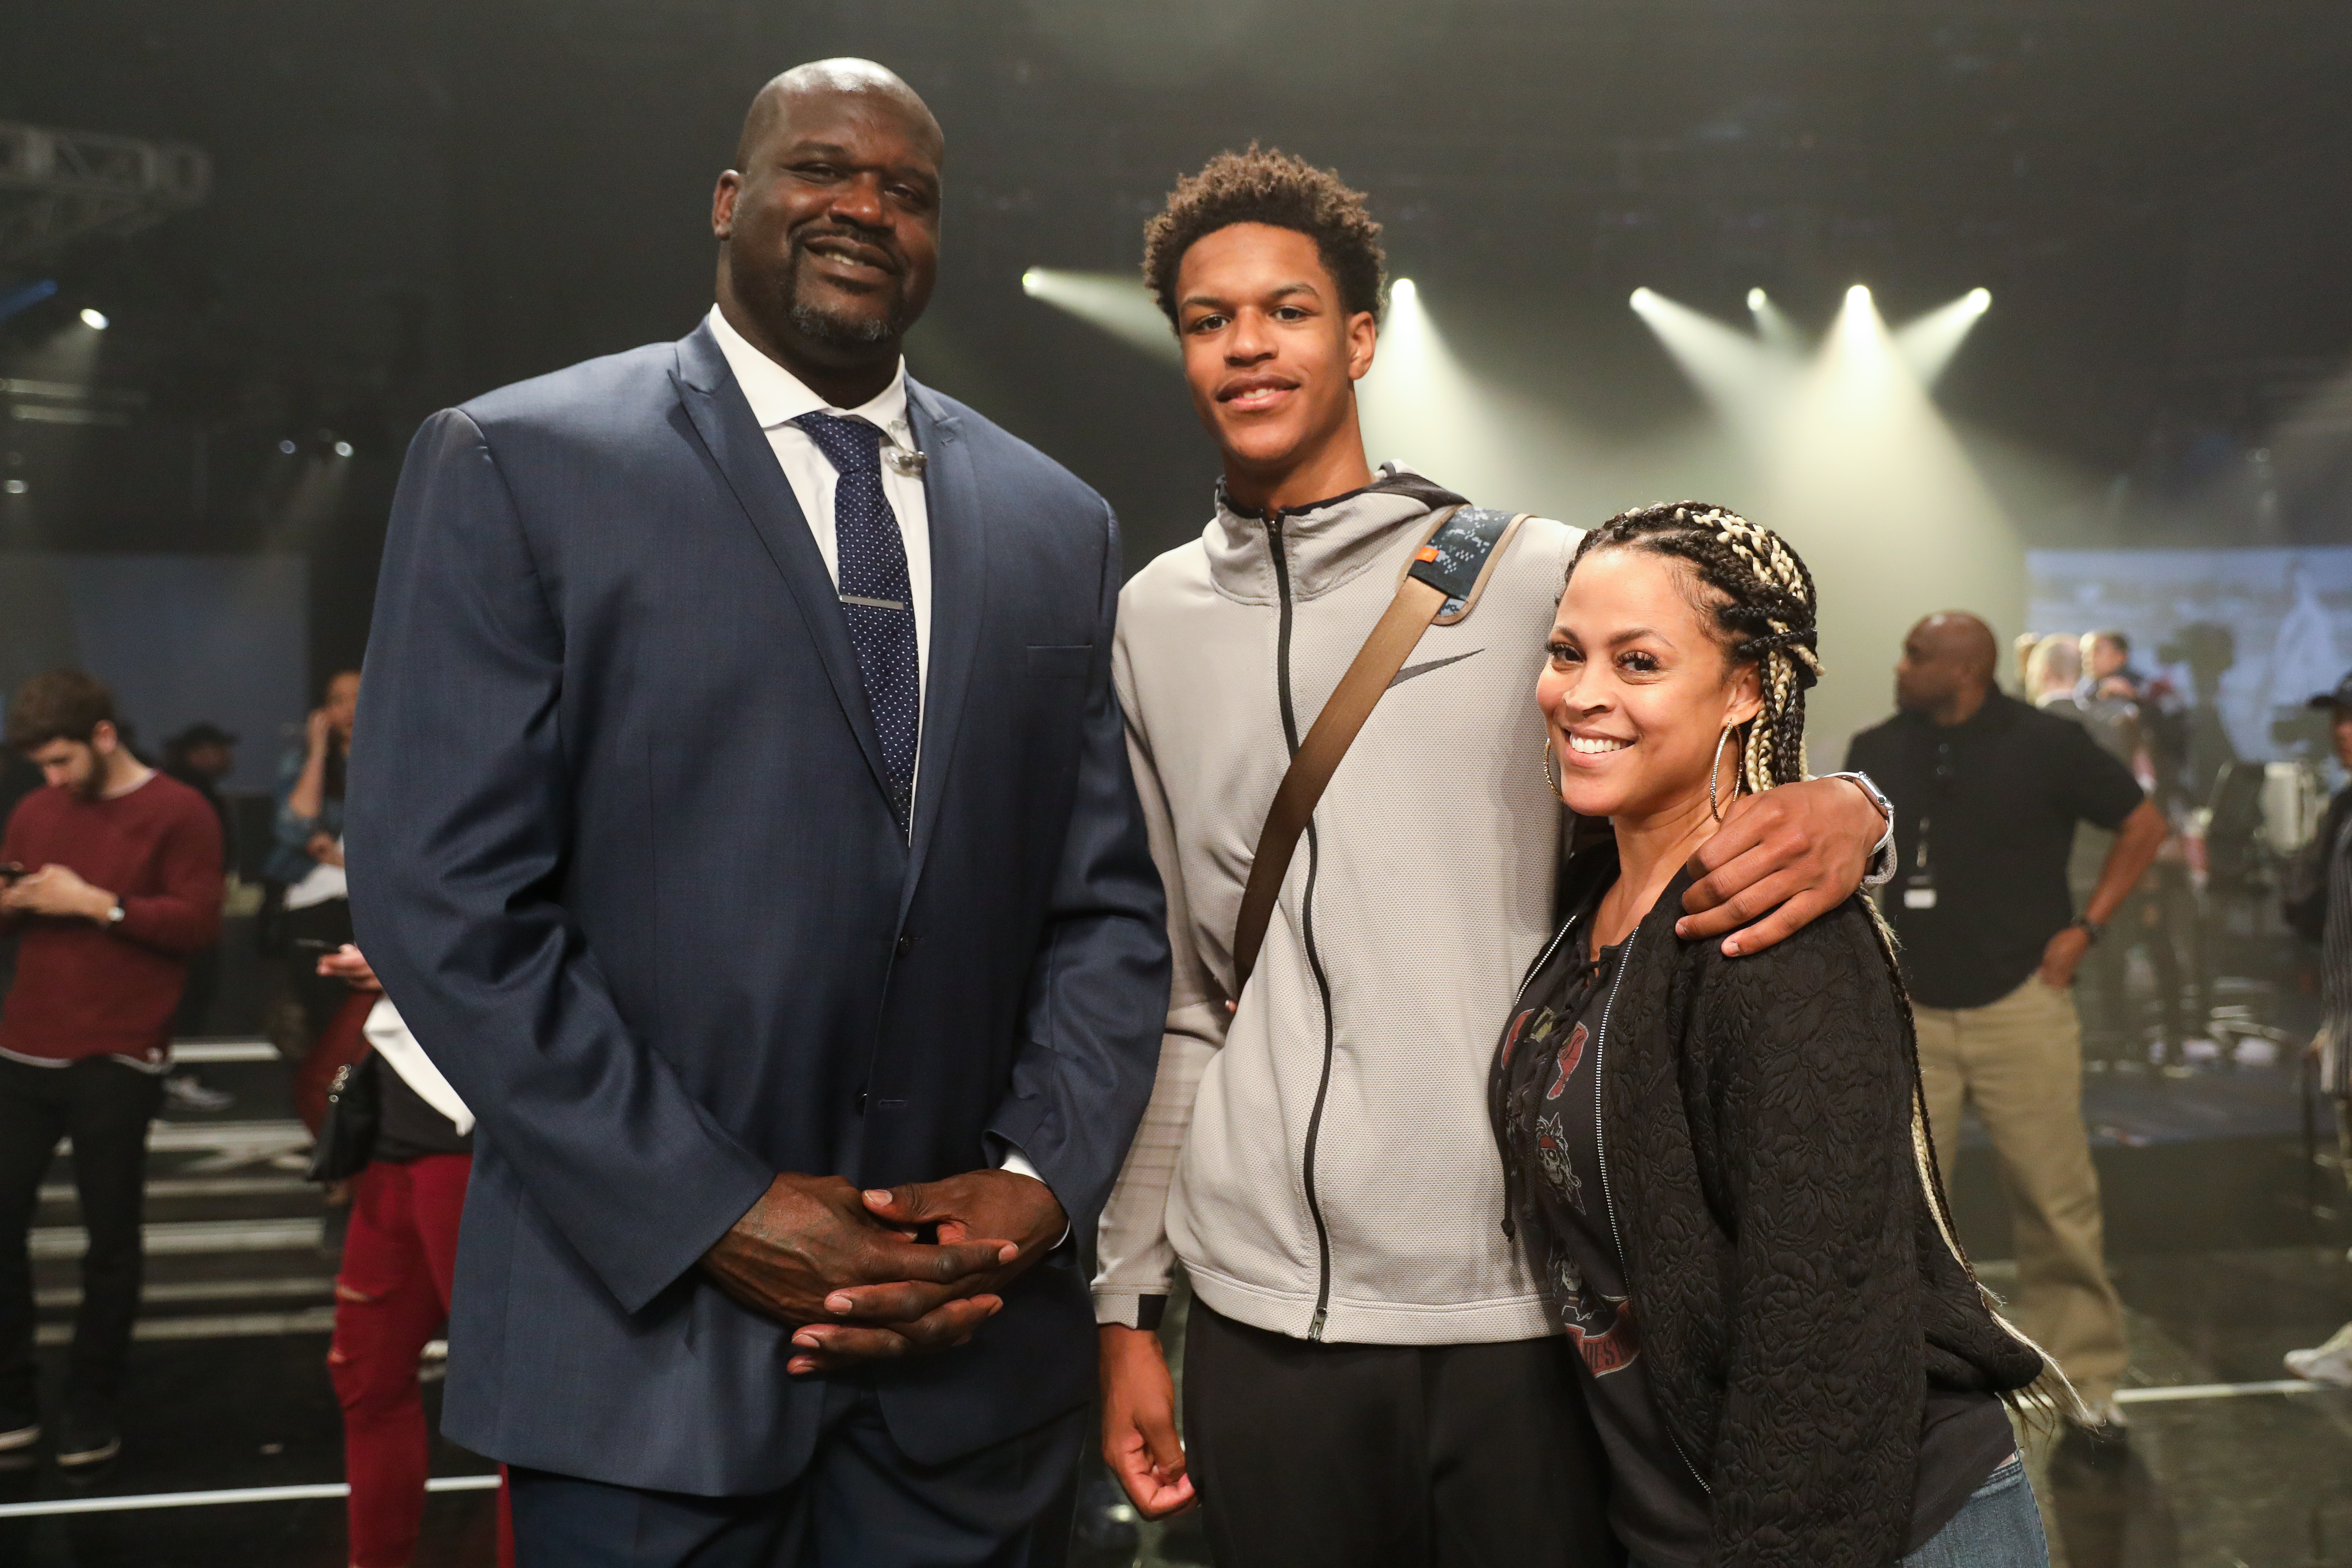 Heart Ailment Will Sideline Shareef O'Neal, Shaq's Son For The Entire Season